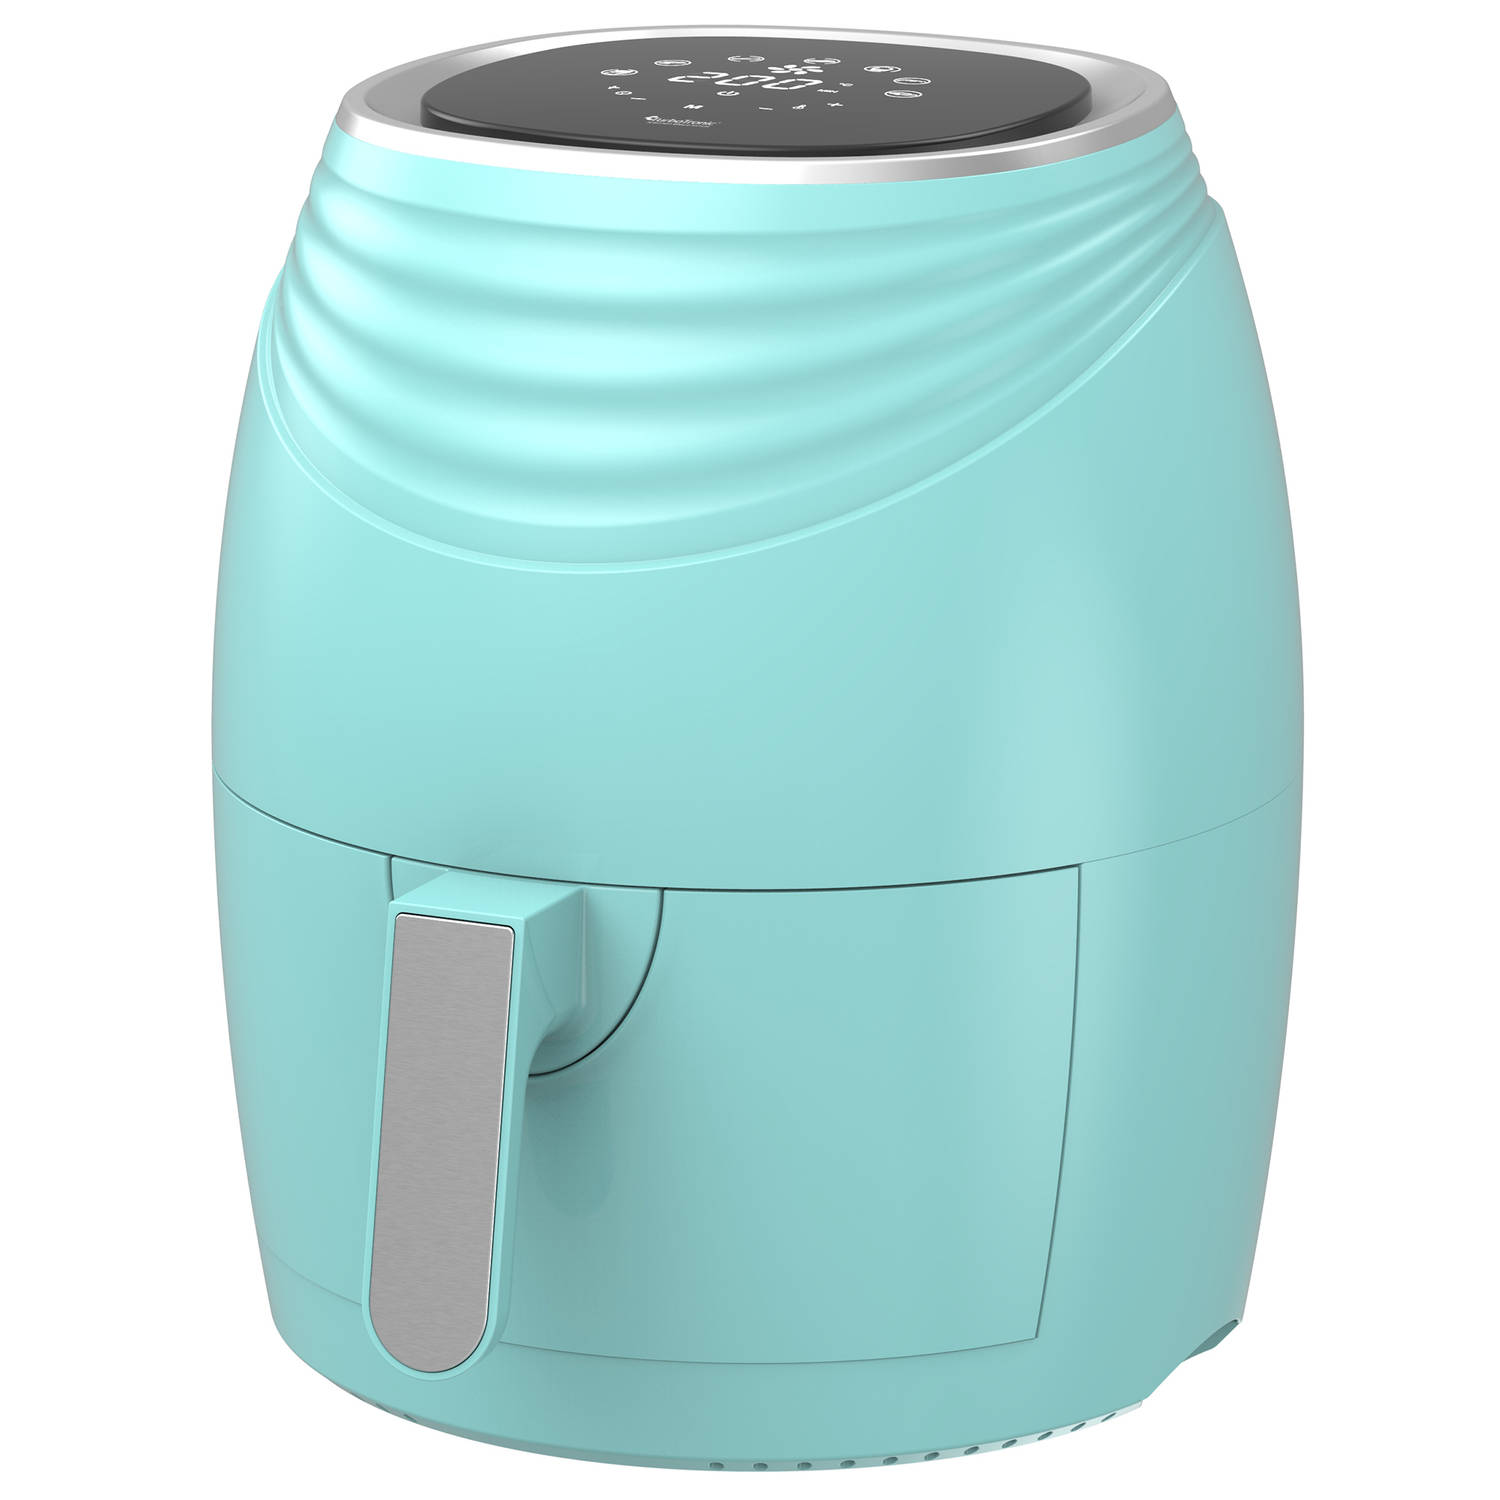 TurboTronic AF11D Digitale Airfryer - Heteluchtfriteuse - 3.5L - Turquoise